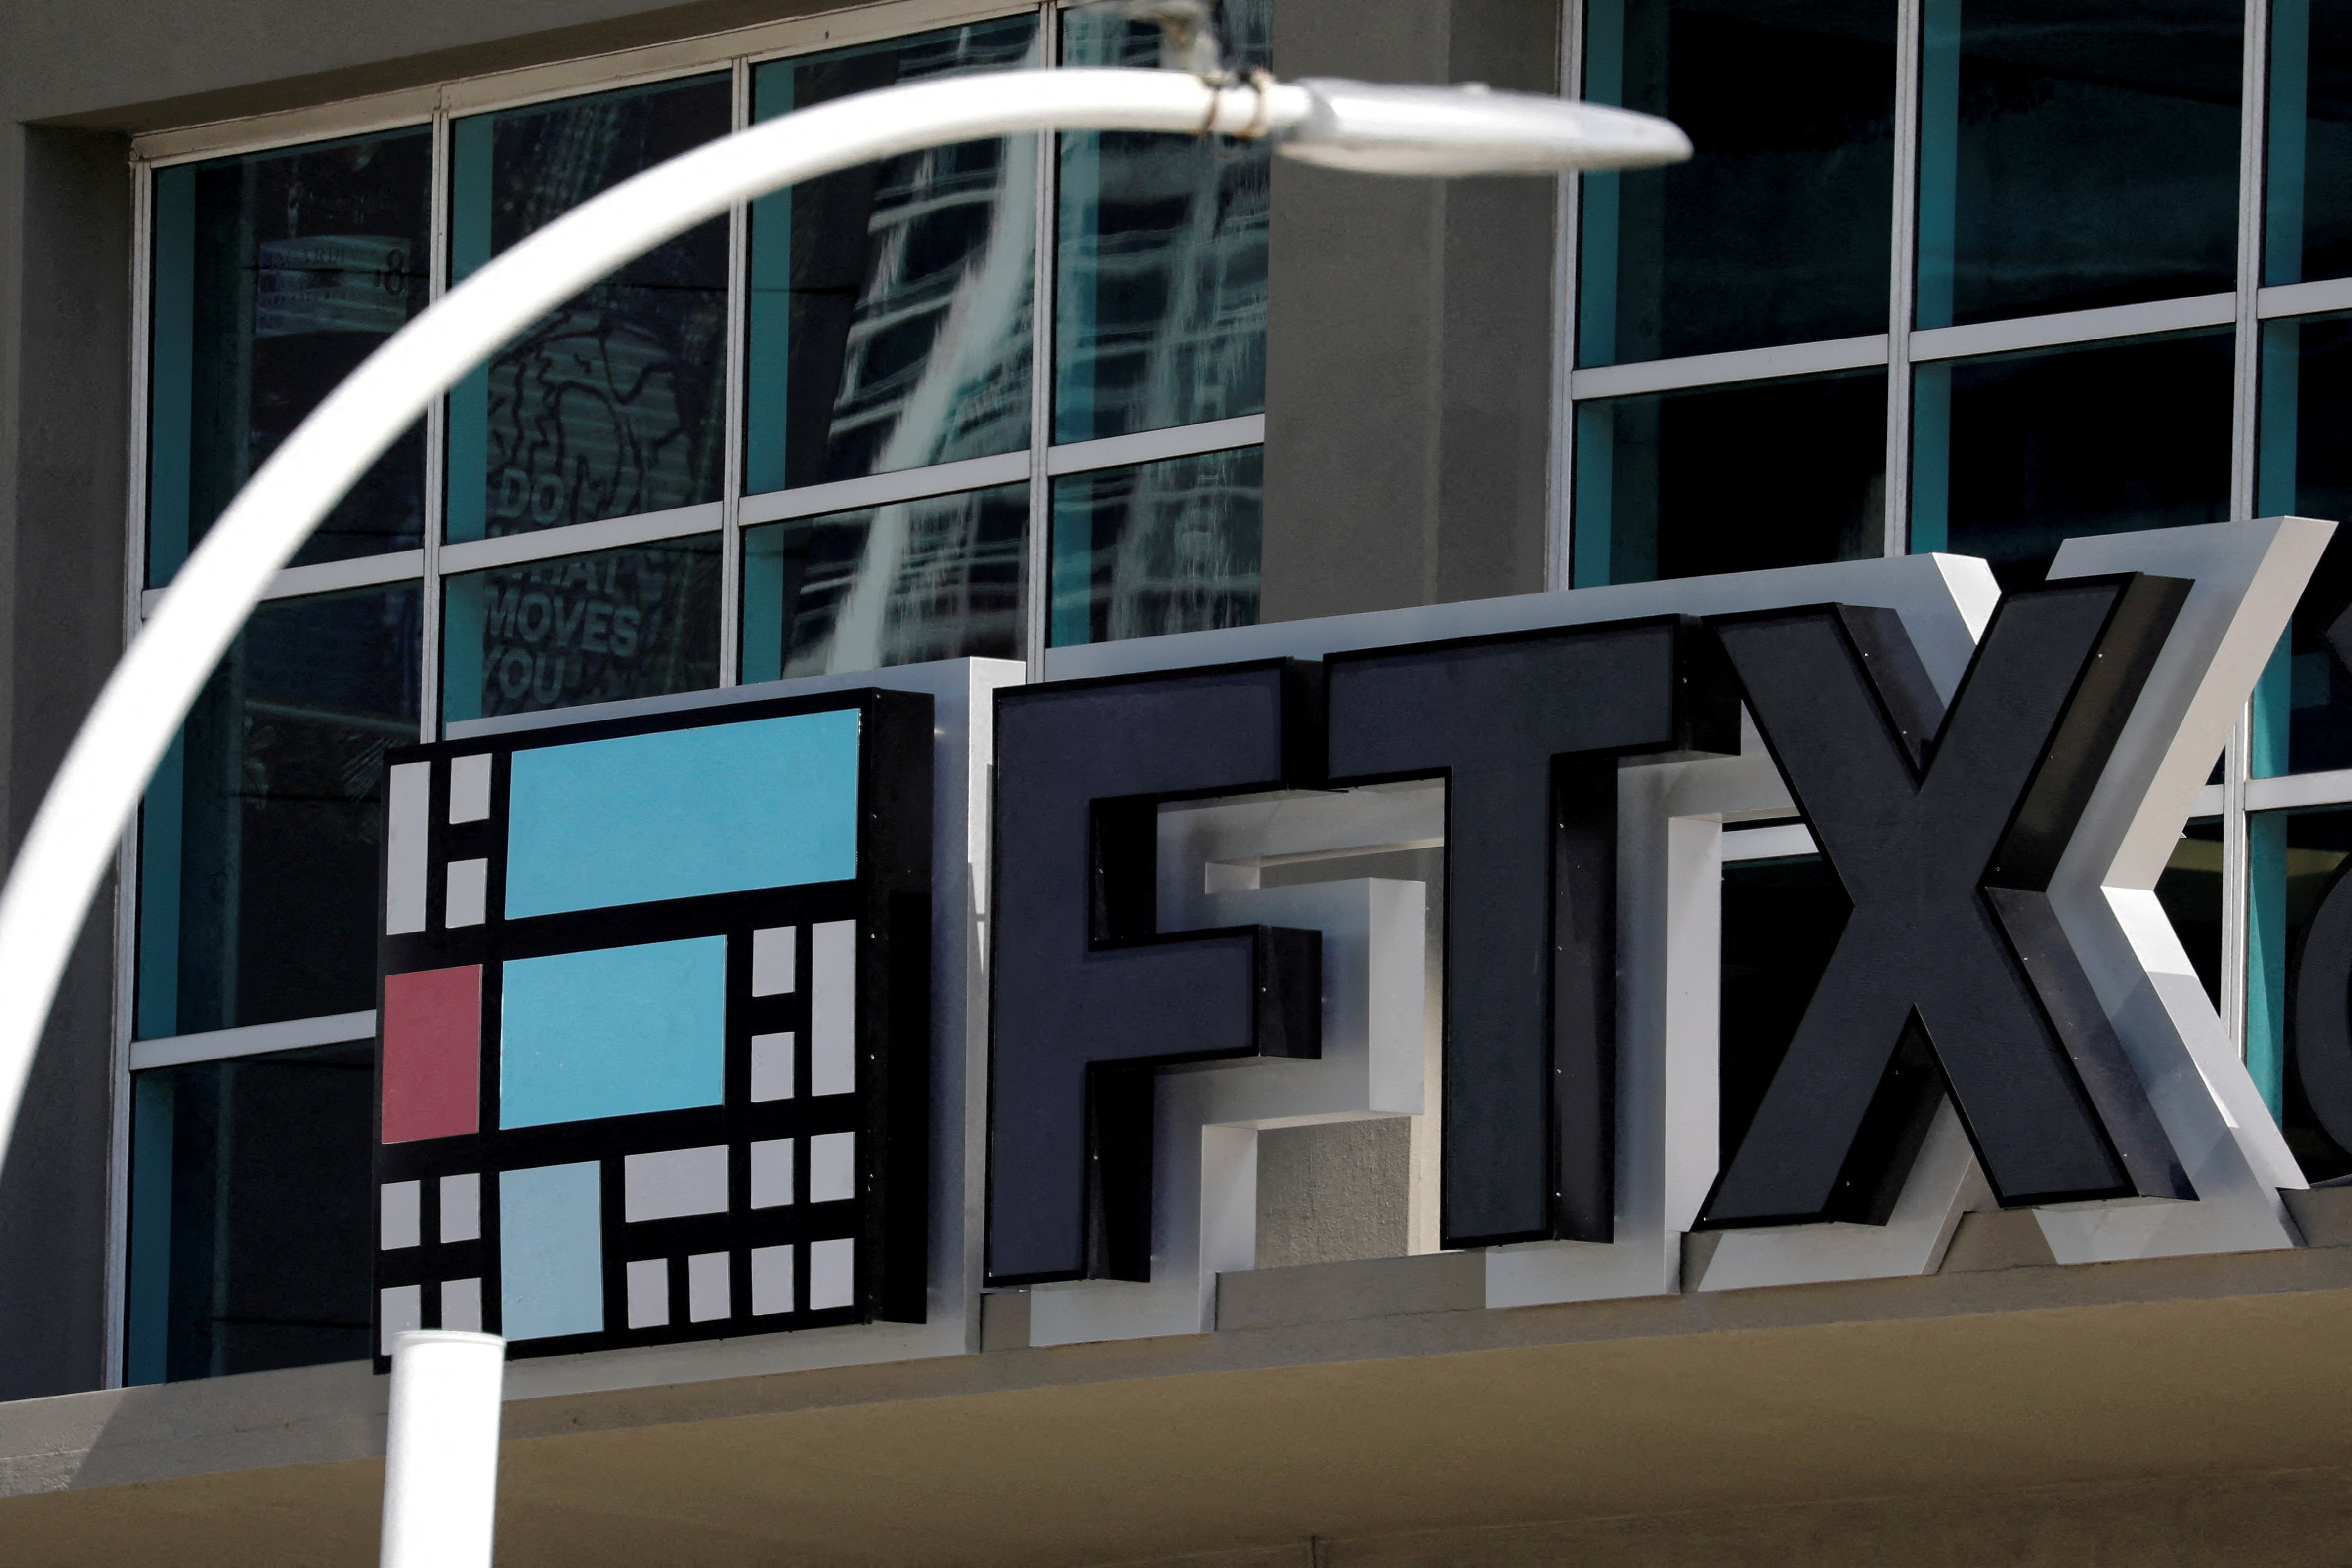 FTX stories $415 mln in hacked crypto, Bankman-Fried says FTX US is solvent